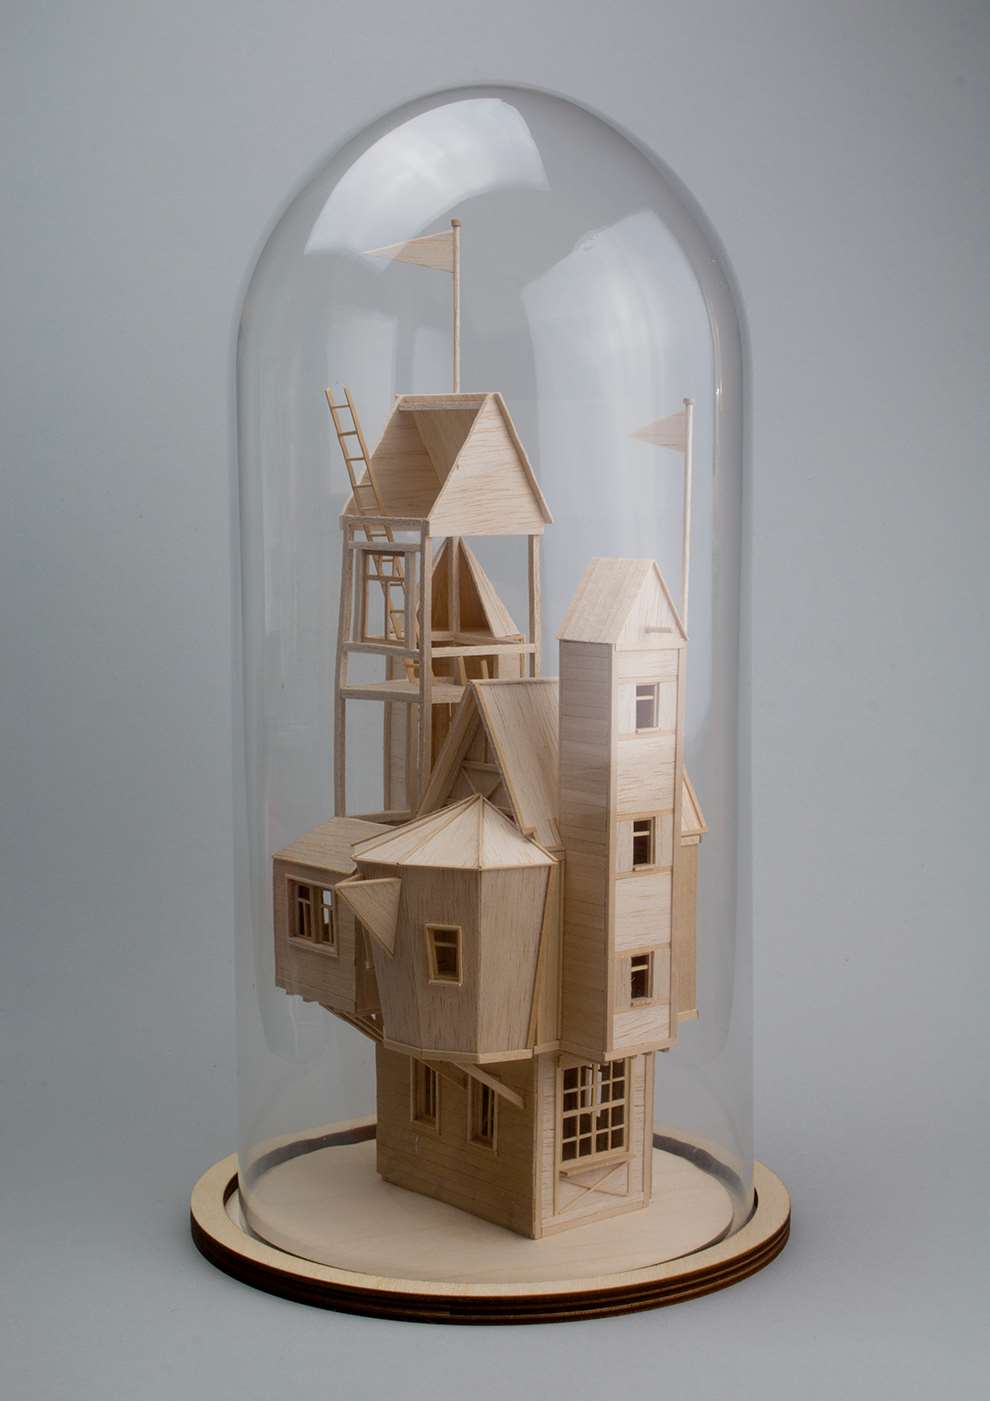 Vera Van Wolferen, Crafted intricate wooden sculpture of a tall house in a glass case. Magical miniature universe.  